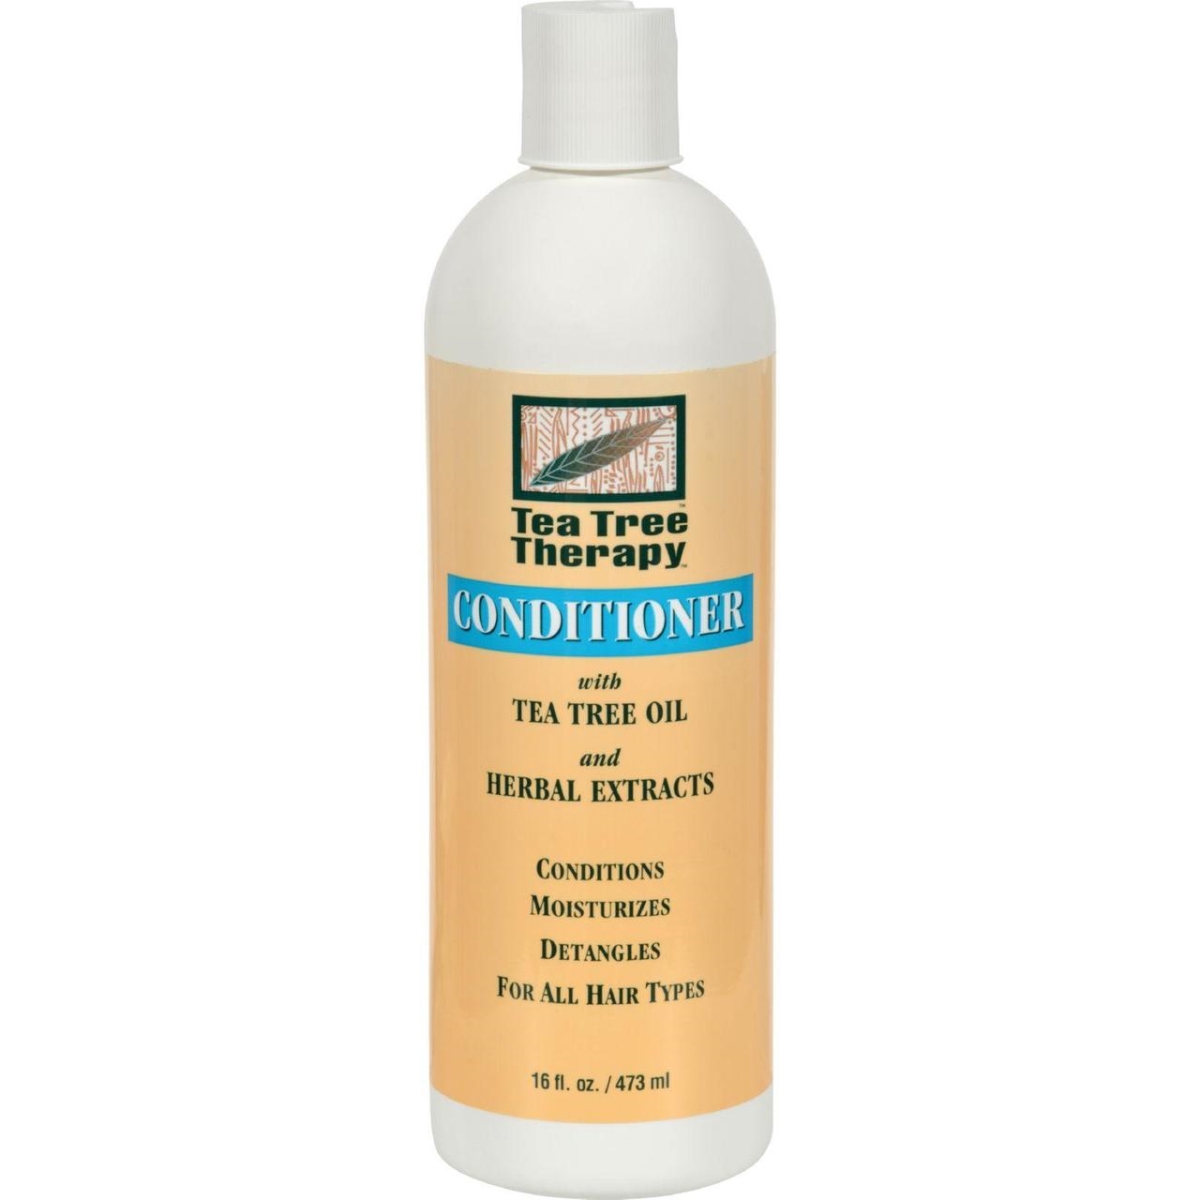 Hg0587642 16 Fl Oz Conditioner With Tea Tree Oil & Herbal Extracts